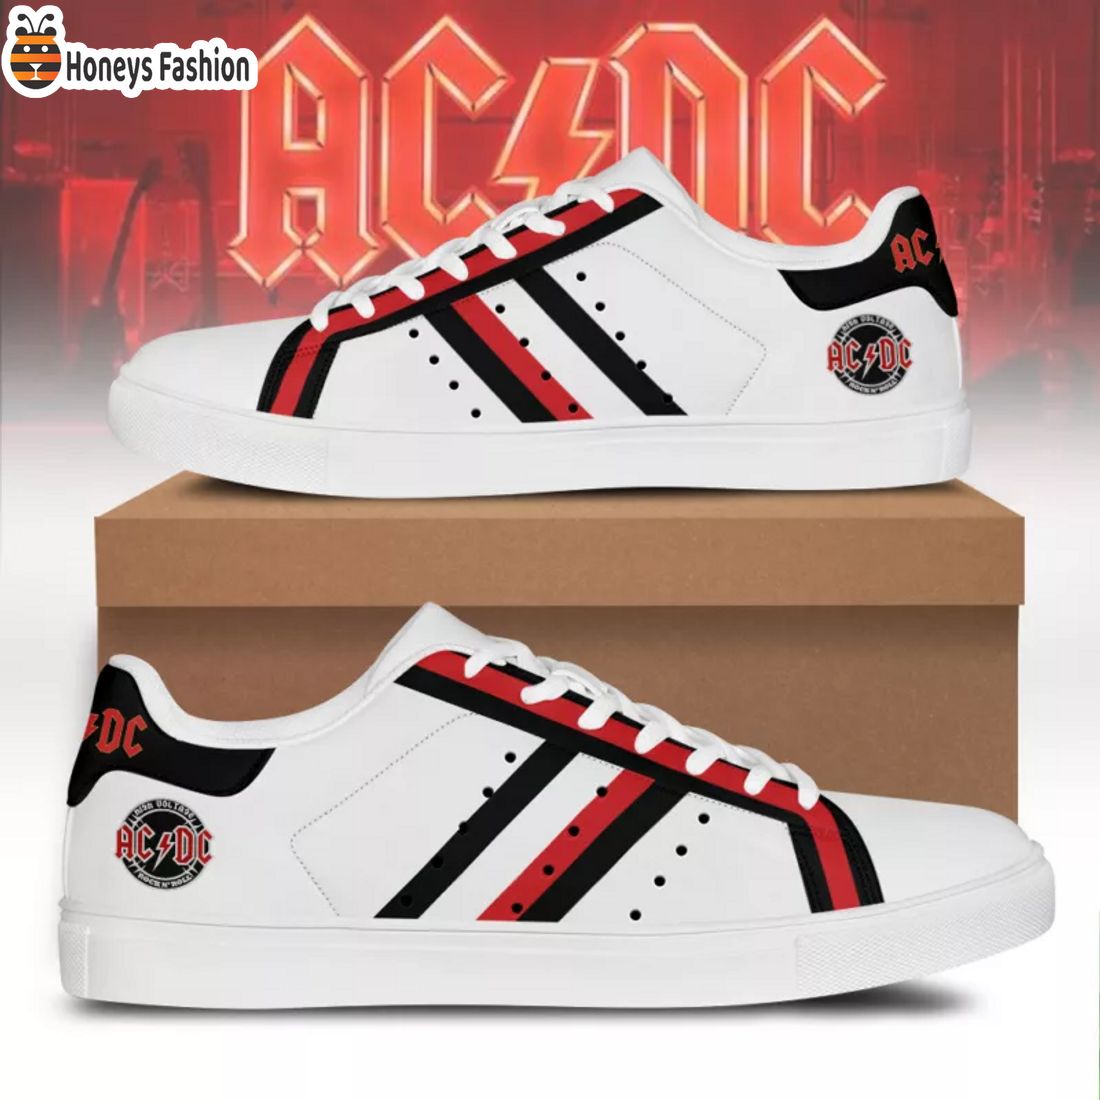 BEST SELLER ACDC High Voltage Rock N’ RollStan Smith Shoes